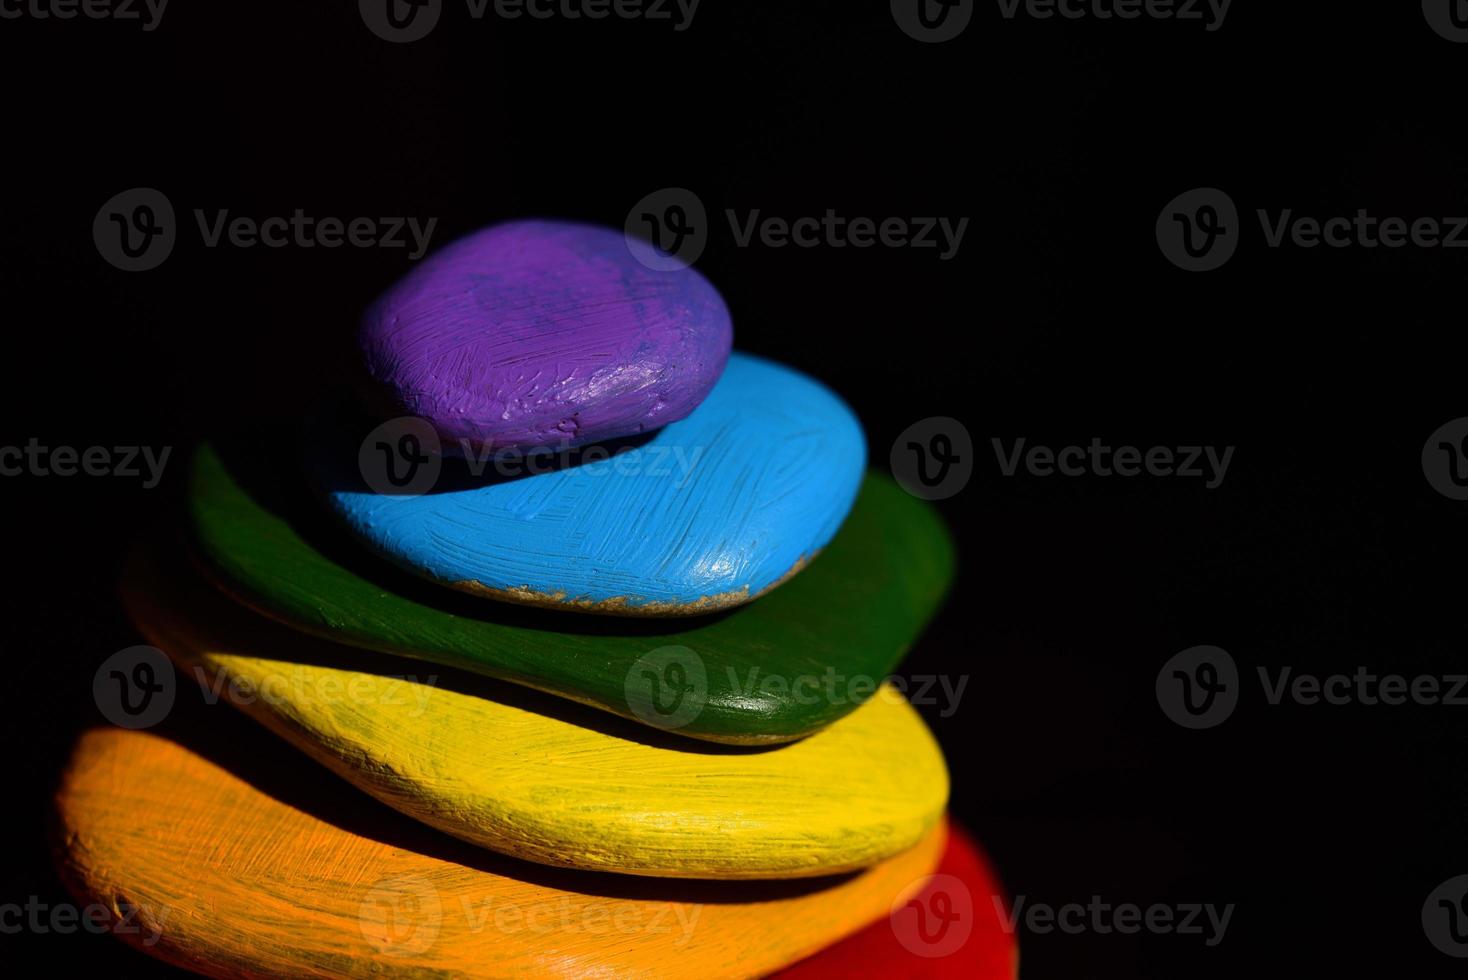 Several brightly colored pebbles painted in rainbow colors lie on top of one another in front of a dark background photo